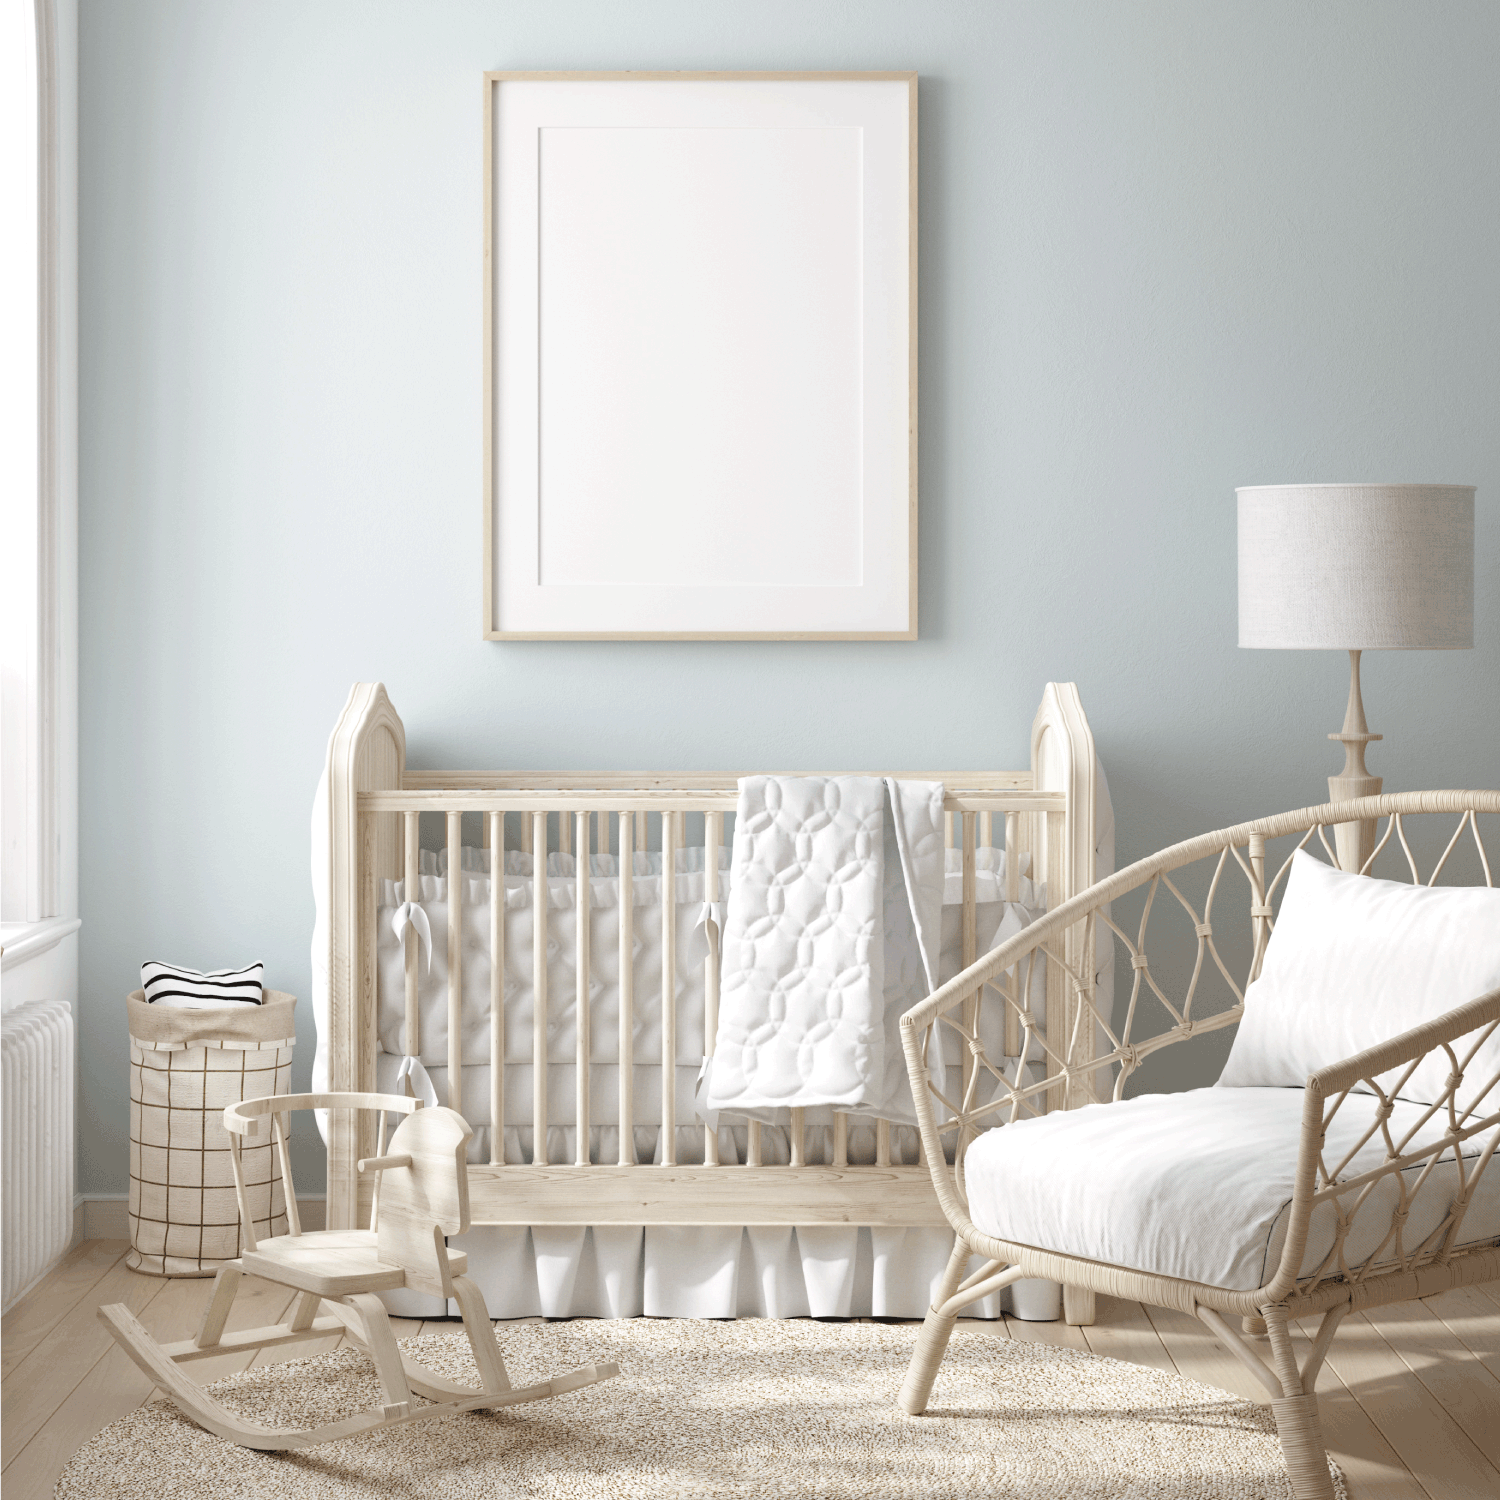 white nursery with natural wooden furniture